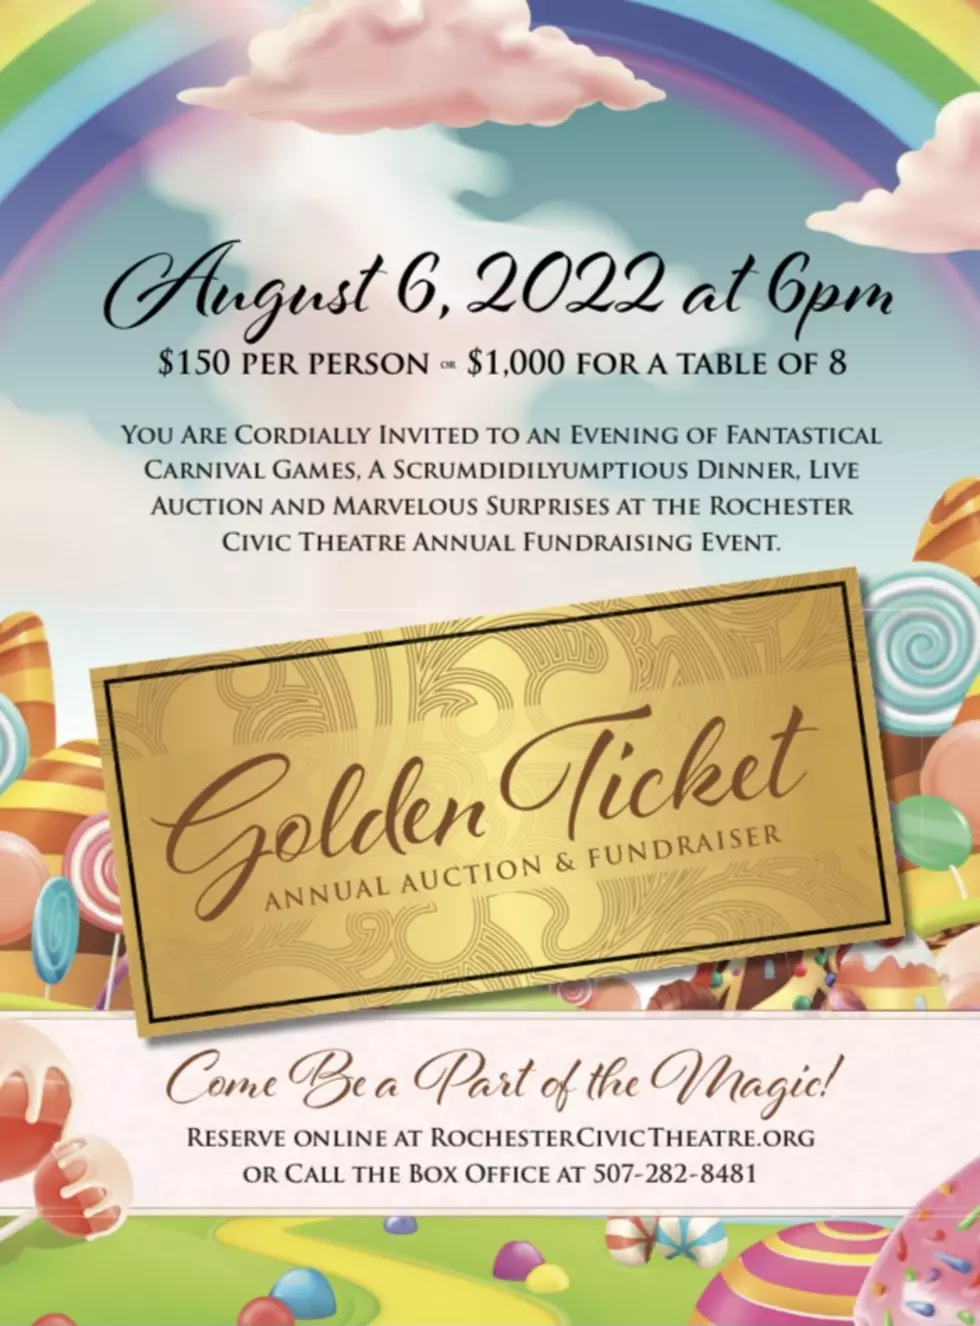 Rochester Civic Theatre Golden Ticket Annual Auction & Fundraiser